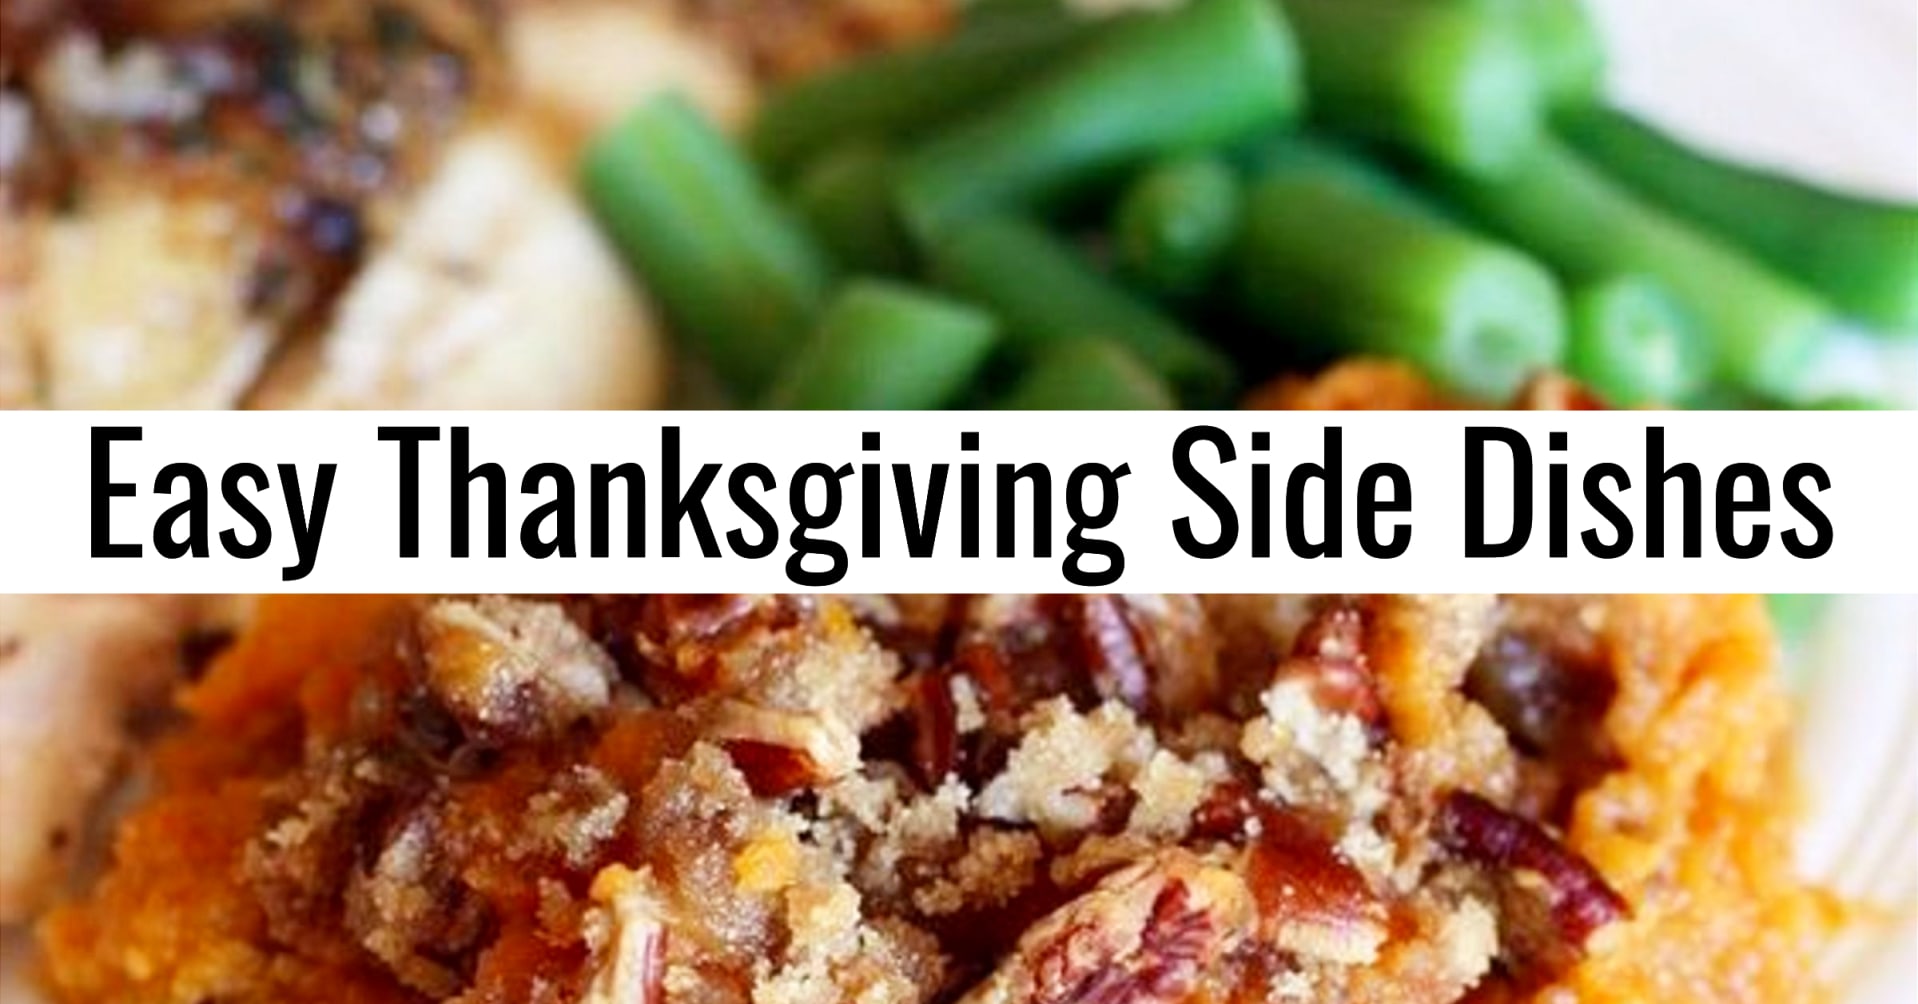 Easy Thanksgiving recipes - Thanksgiving vegetable side dishes and more easy make ahead side dishes for Thanksgiving or any Holiday dinner meal